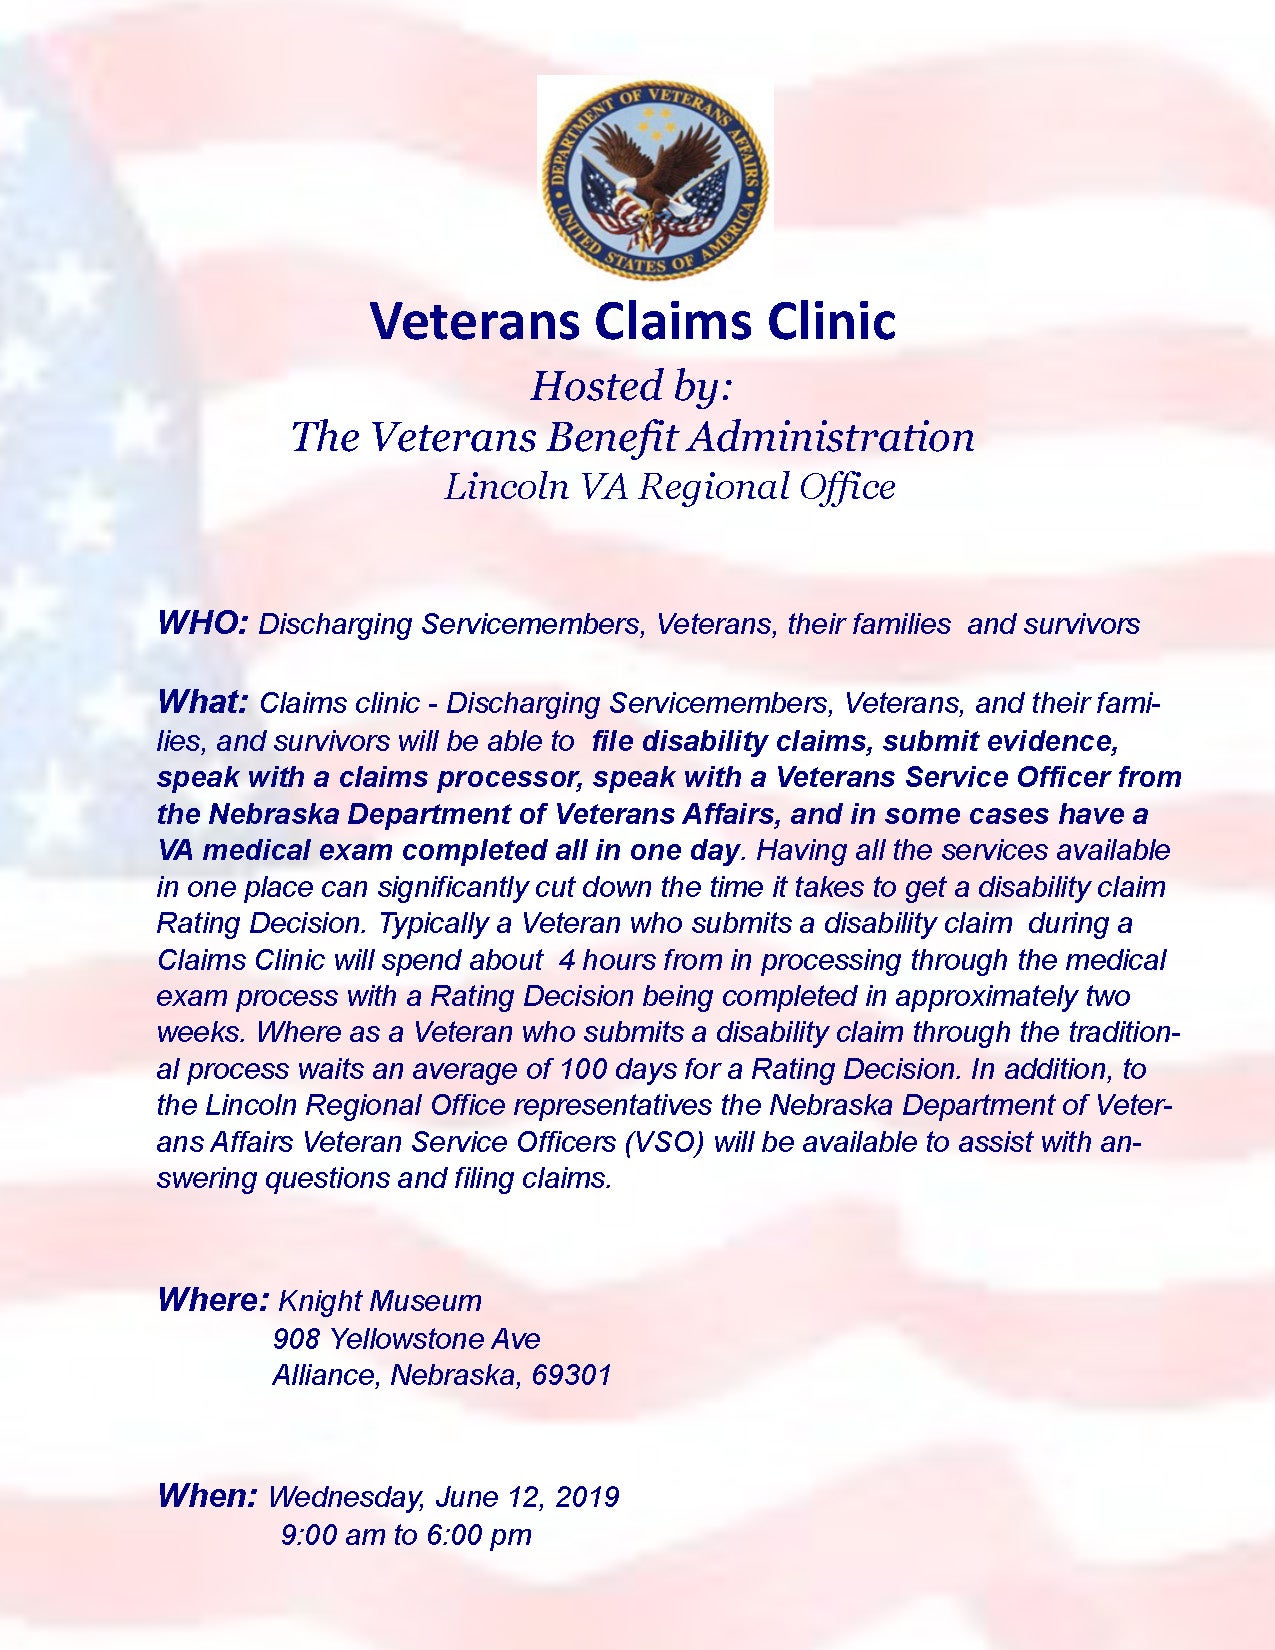 Claims Clinic Flyer Image